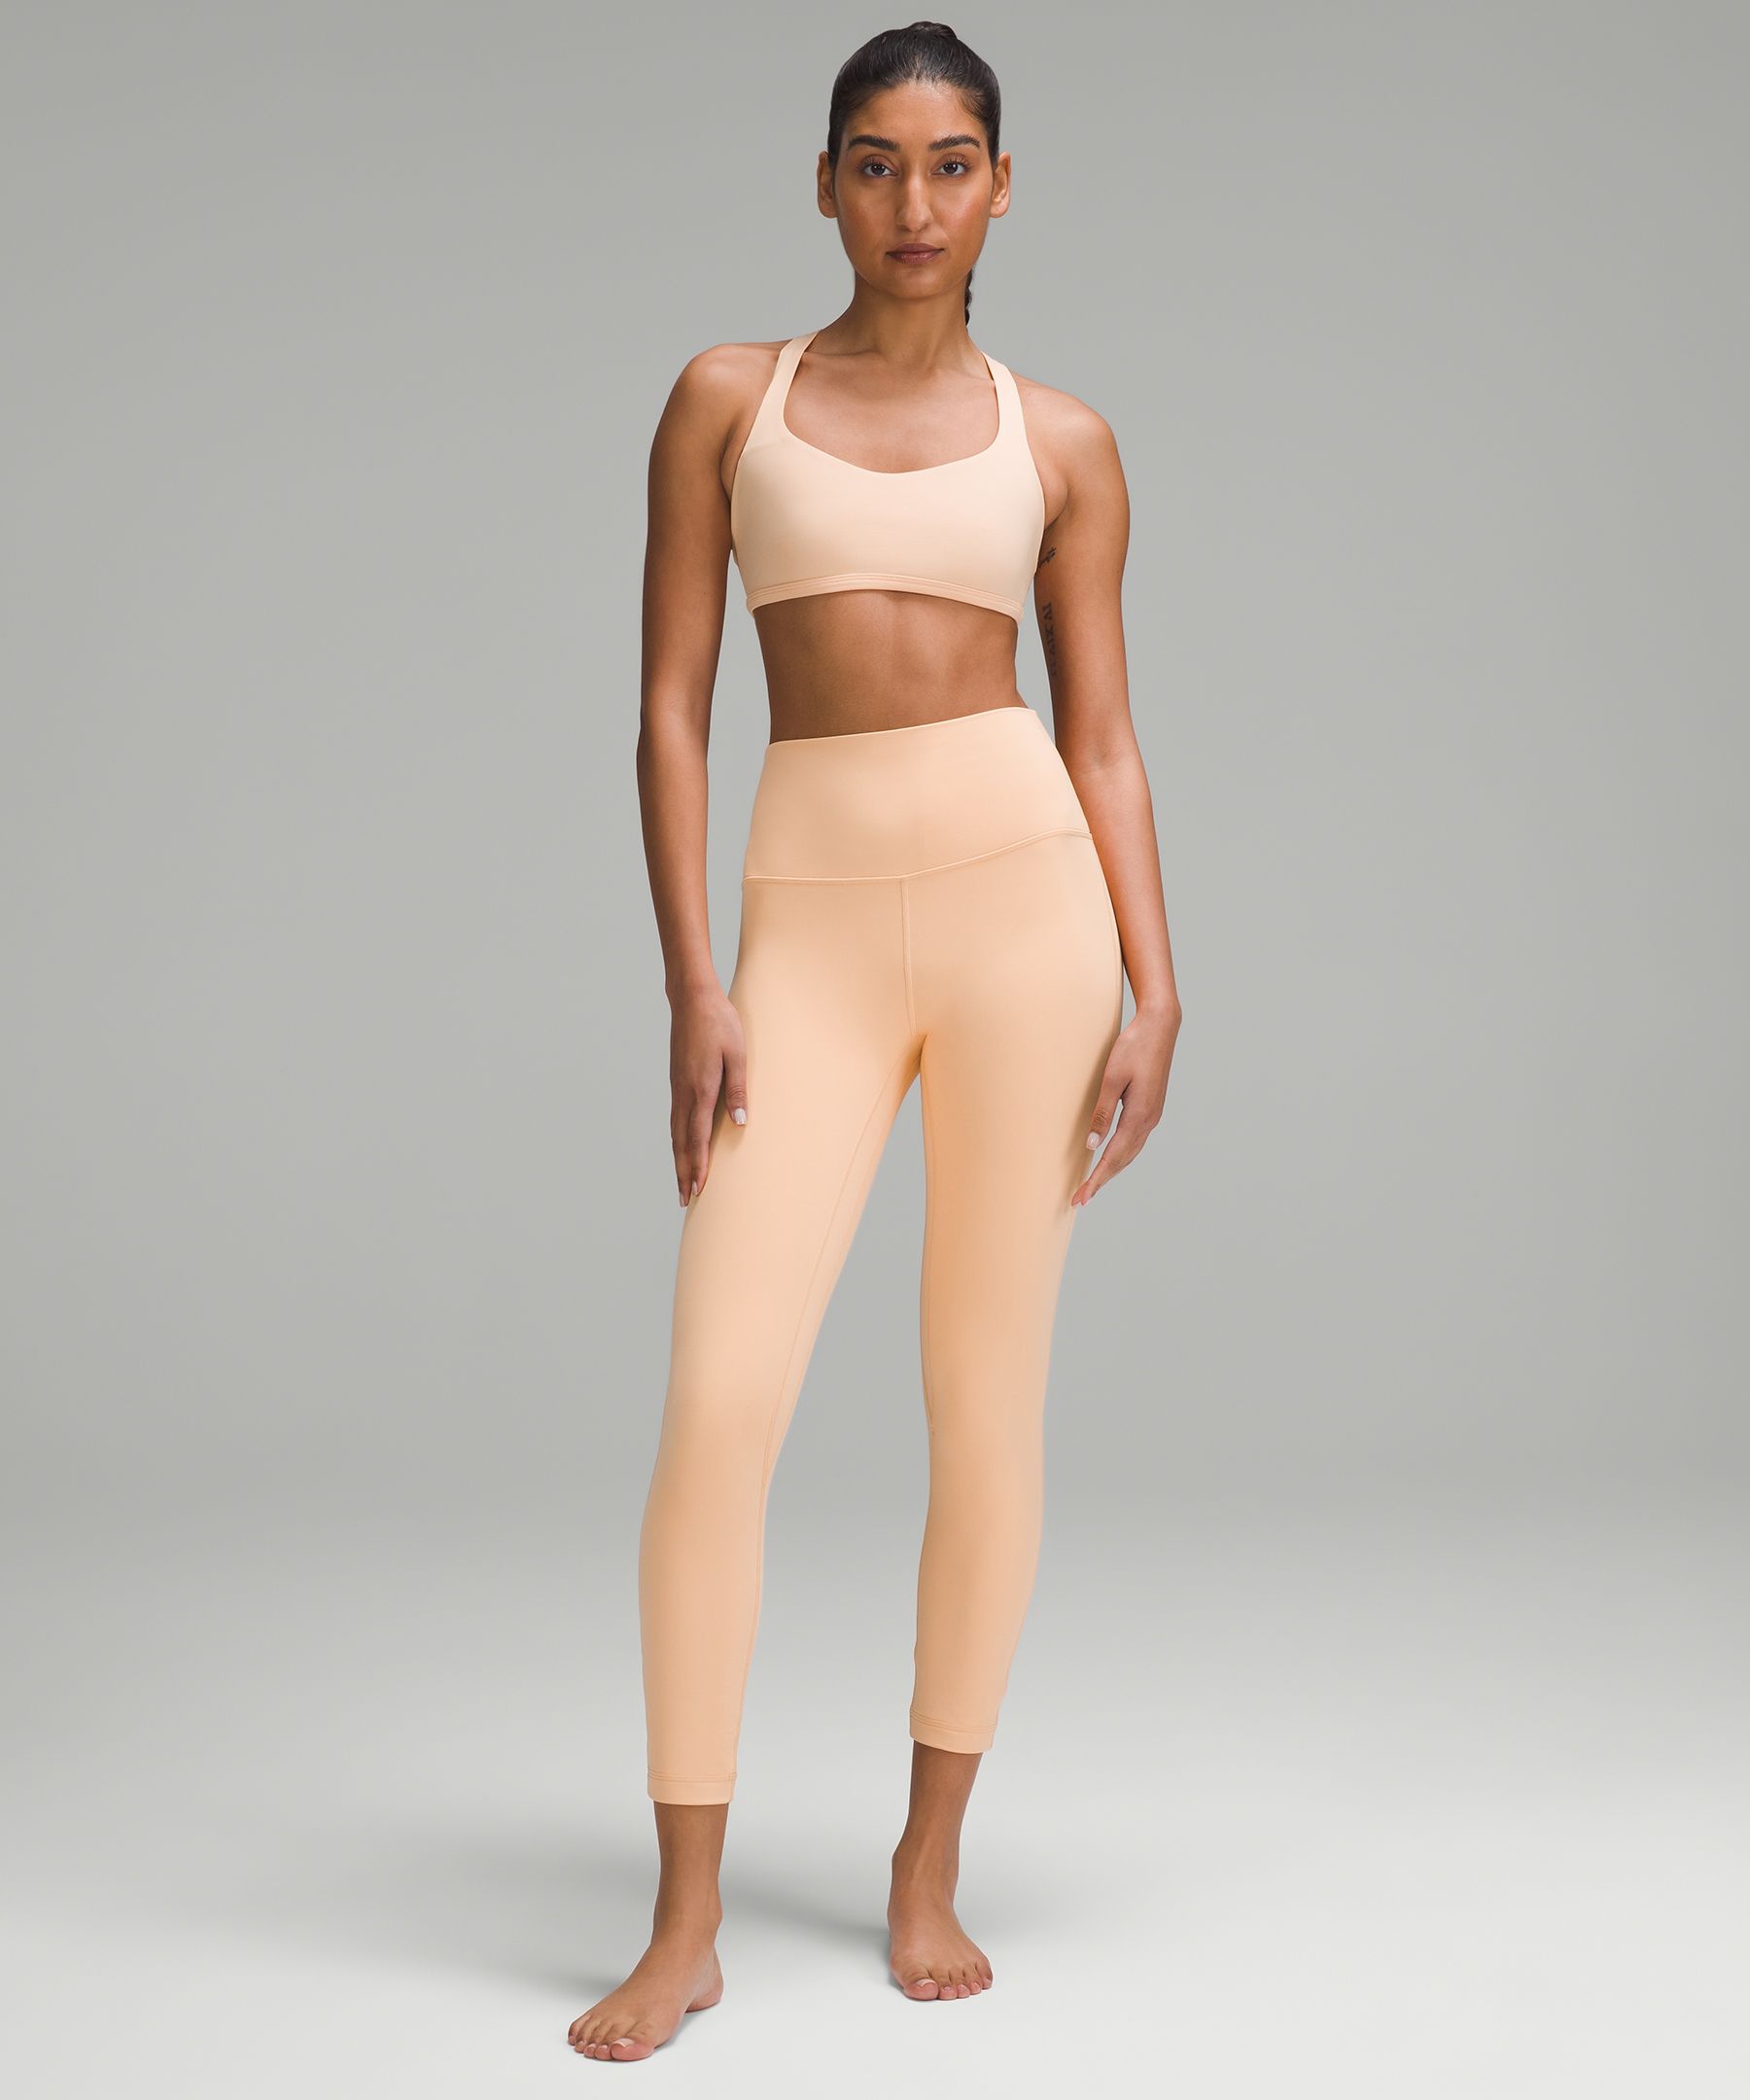 Lululemon set strappy back bra and crop leggings outfit Size 6 - $20 - From  Becky